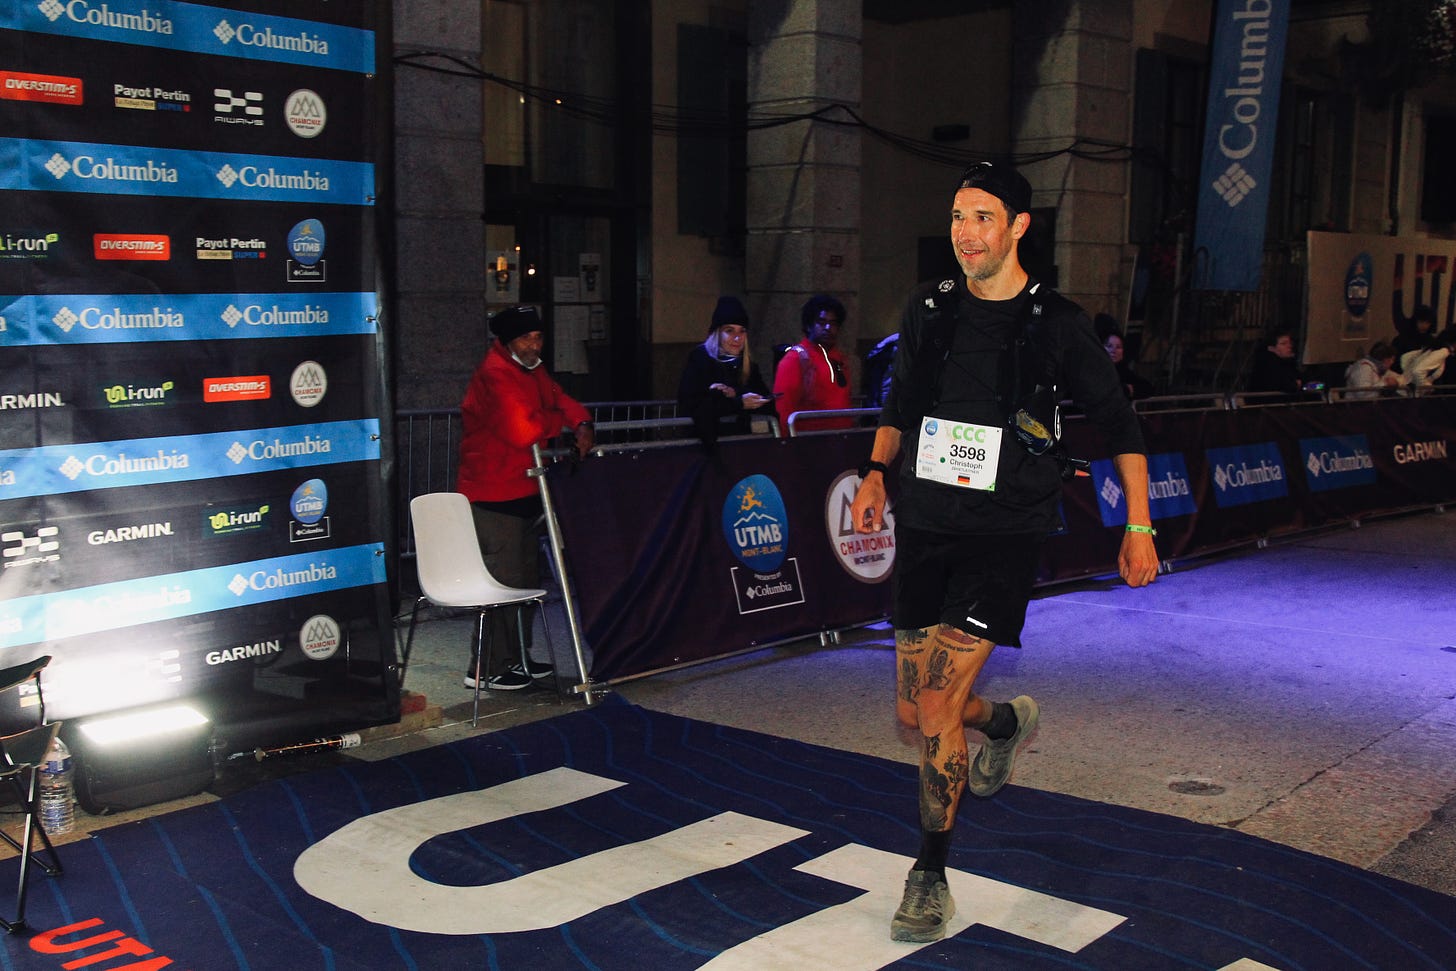 Chris crossing the finish line of CCC in 2021